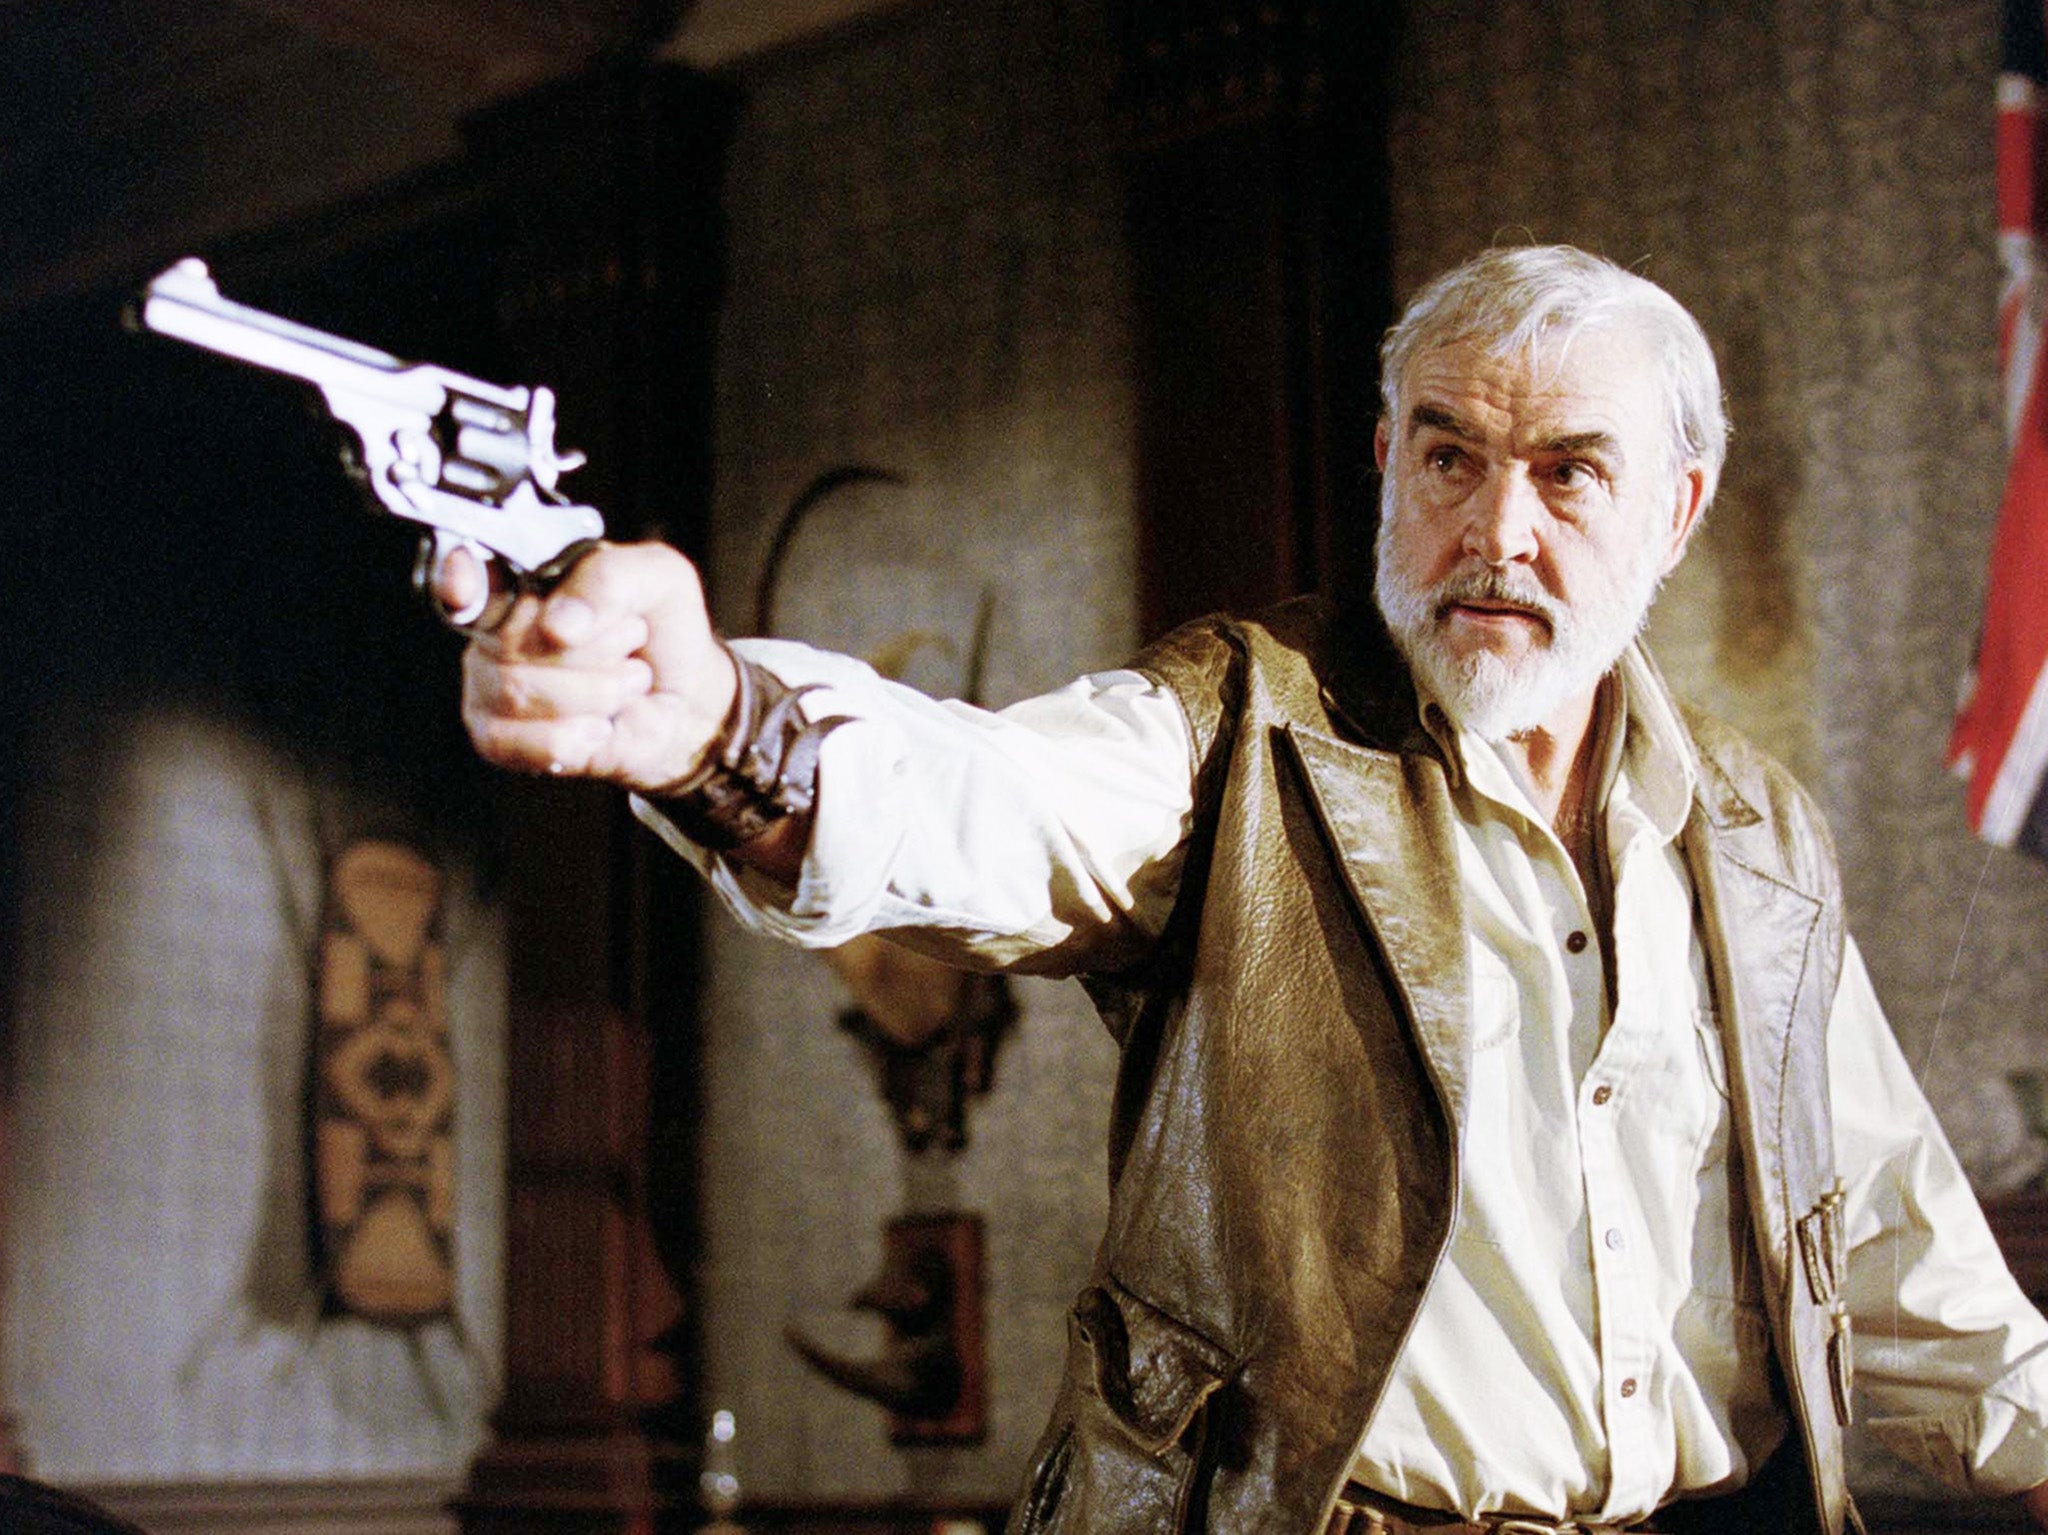 ‘He wanted to be playing golf’: Sean Connery in 2003’s ‘The League of Extraordinary Gentlemen’